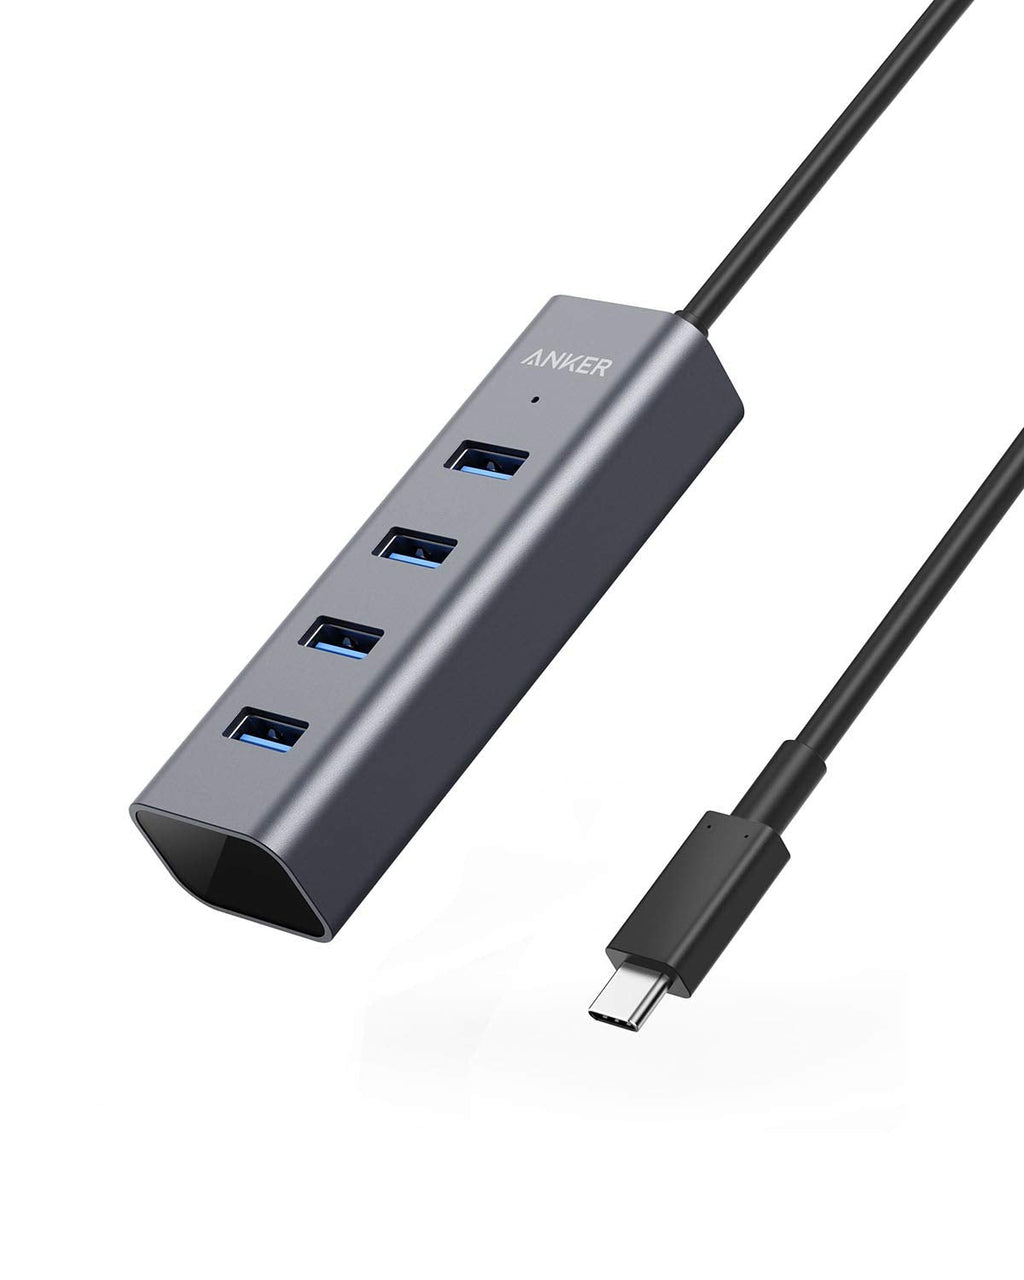 [Australia - AusPower] - Anker USB C Hub, Aluminum USB C Adapter with 4 USB 3.0 Ports, for MacBook Pro 2018/2017, ChromeBook, XPS, Galaxy S9/S8, and More 